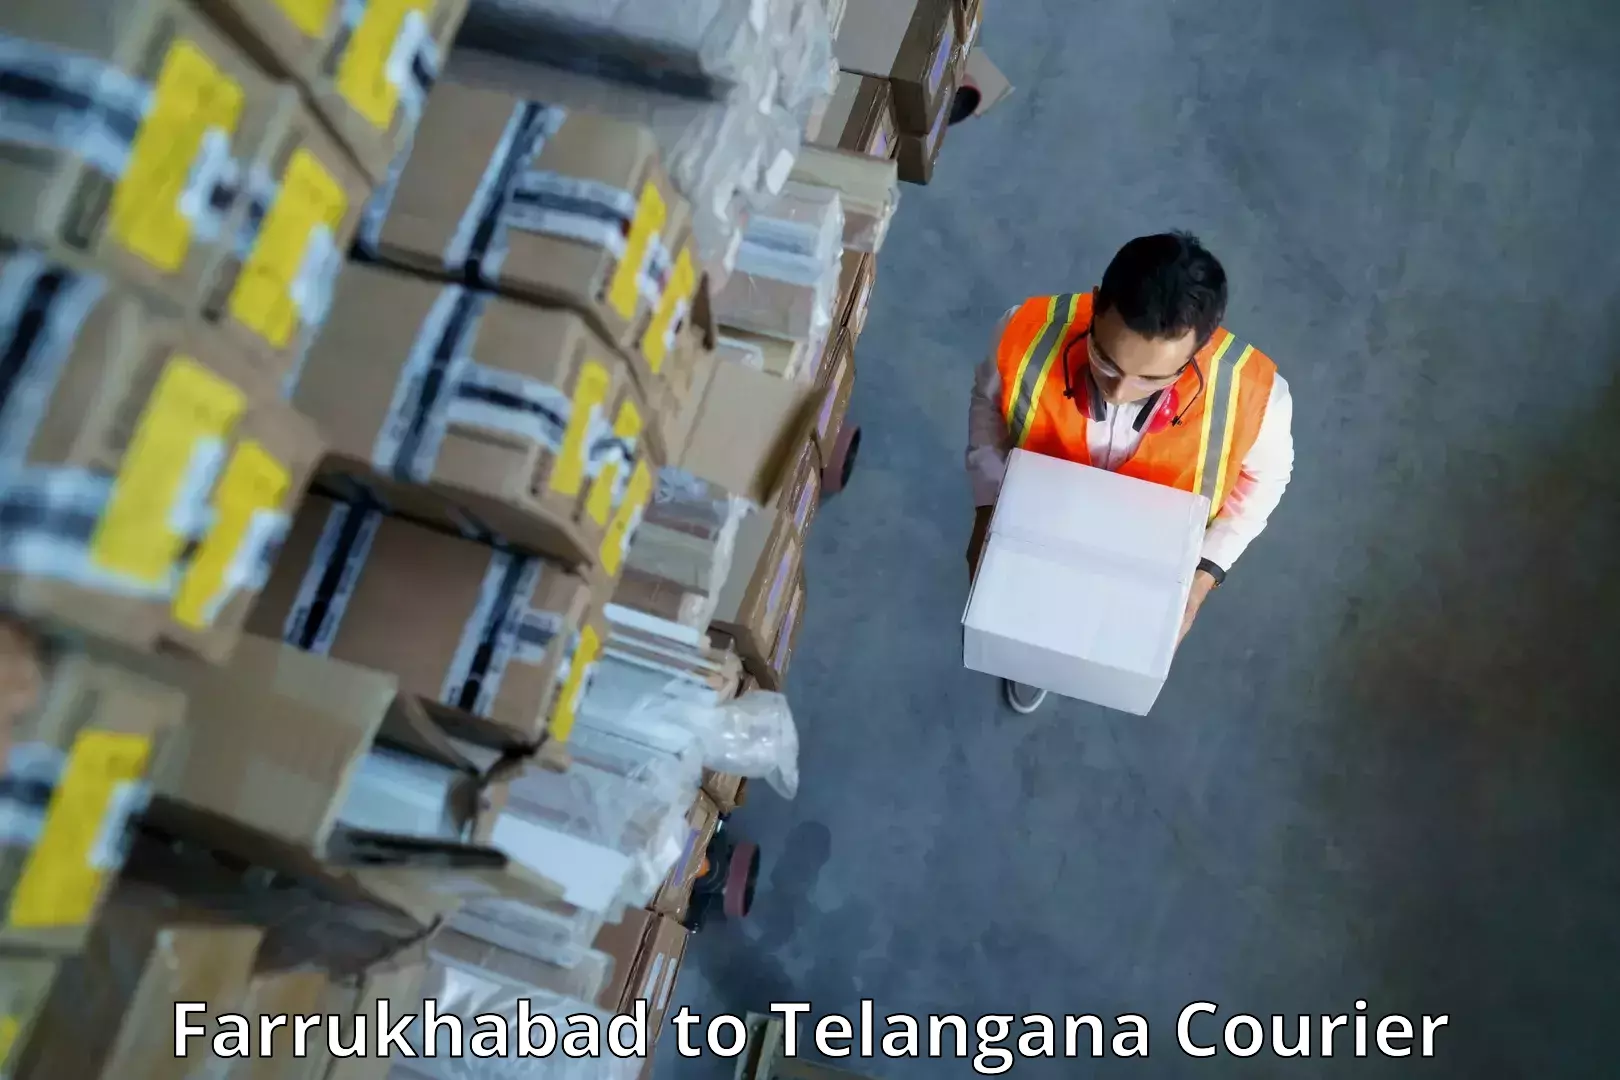 State-of-the-art courier technology Farrukhabad to Sujatha Nagar